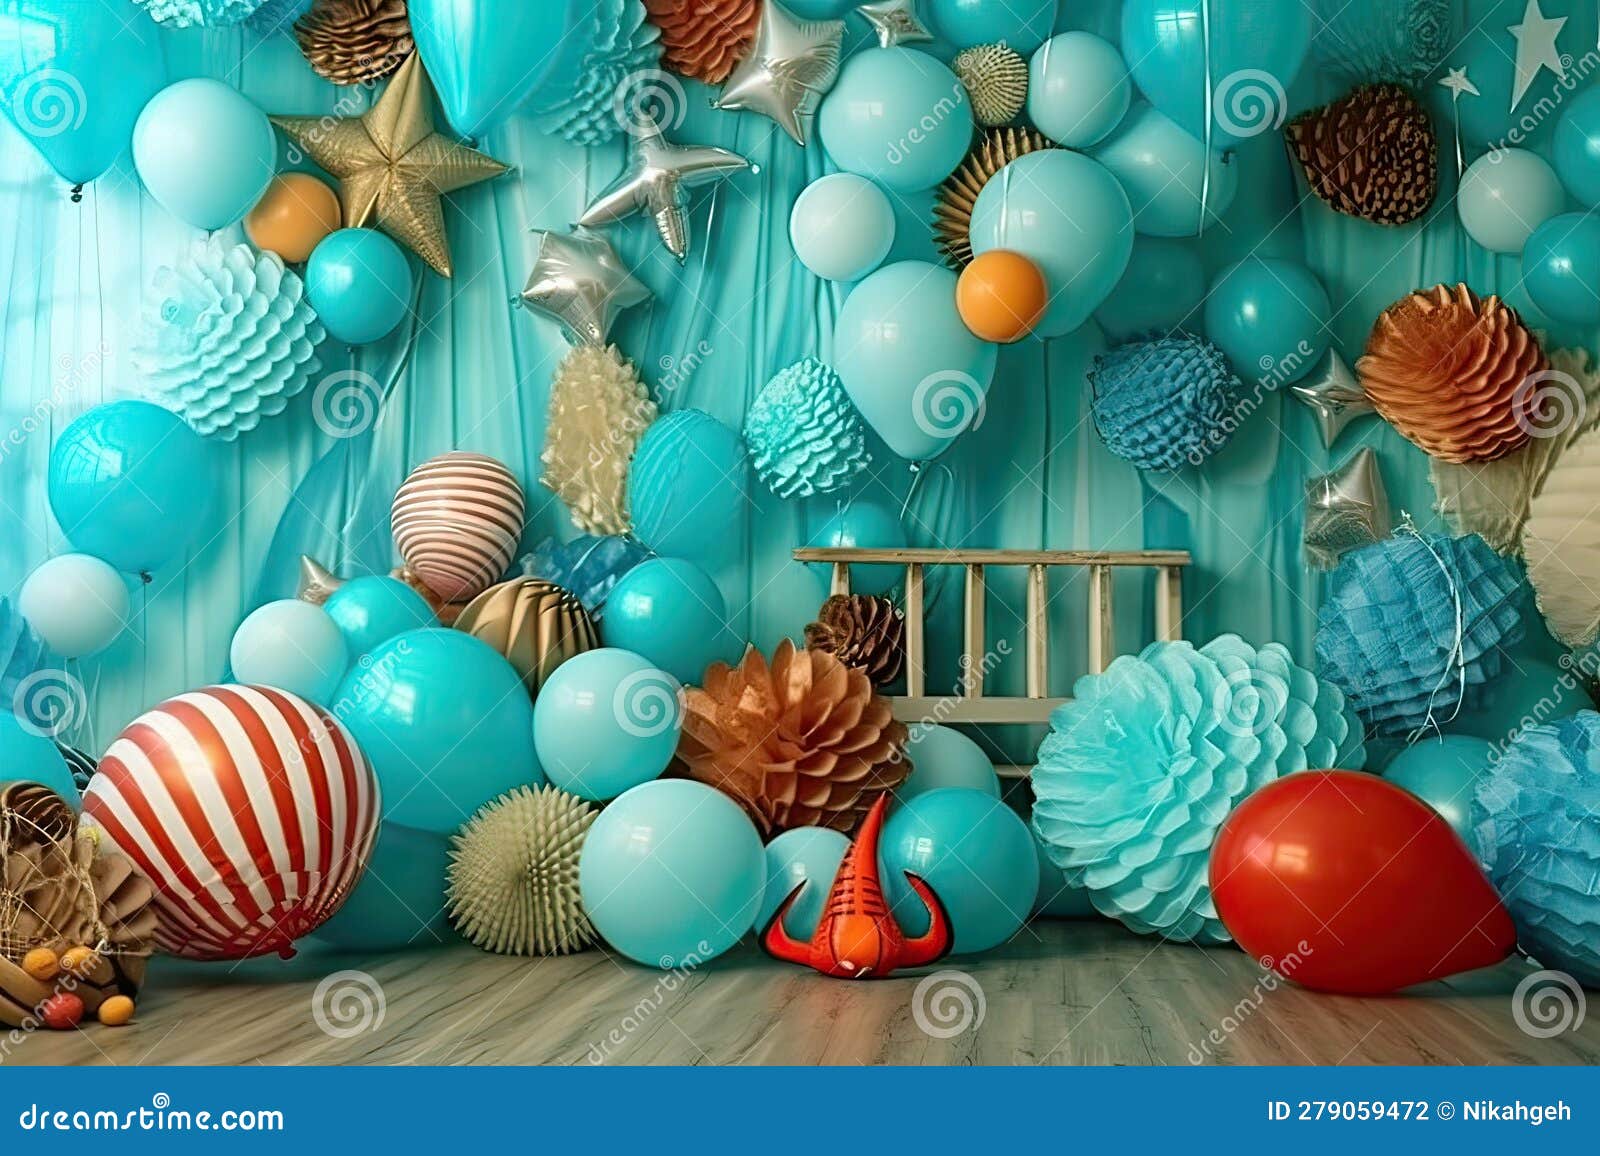 Ballon Decoration Wall Party Kids in the Home Ocean Theme Stock